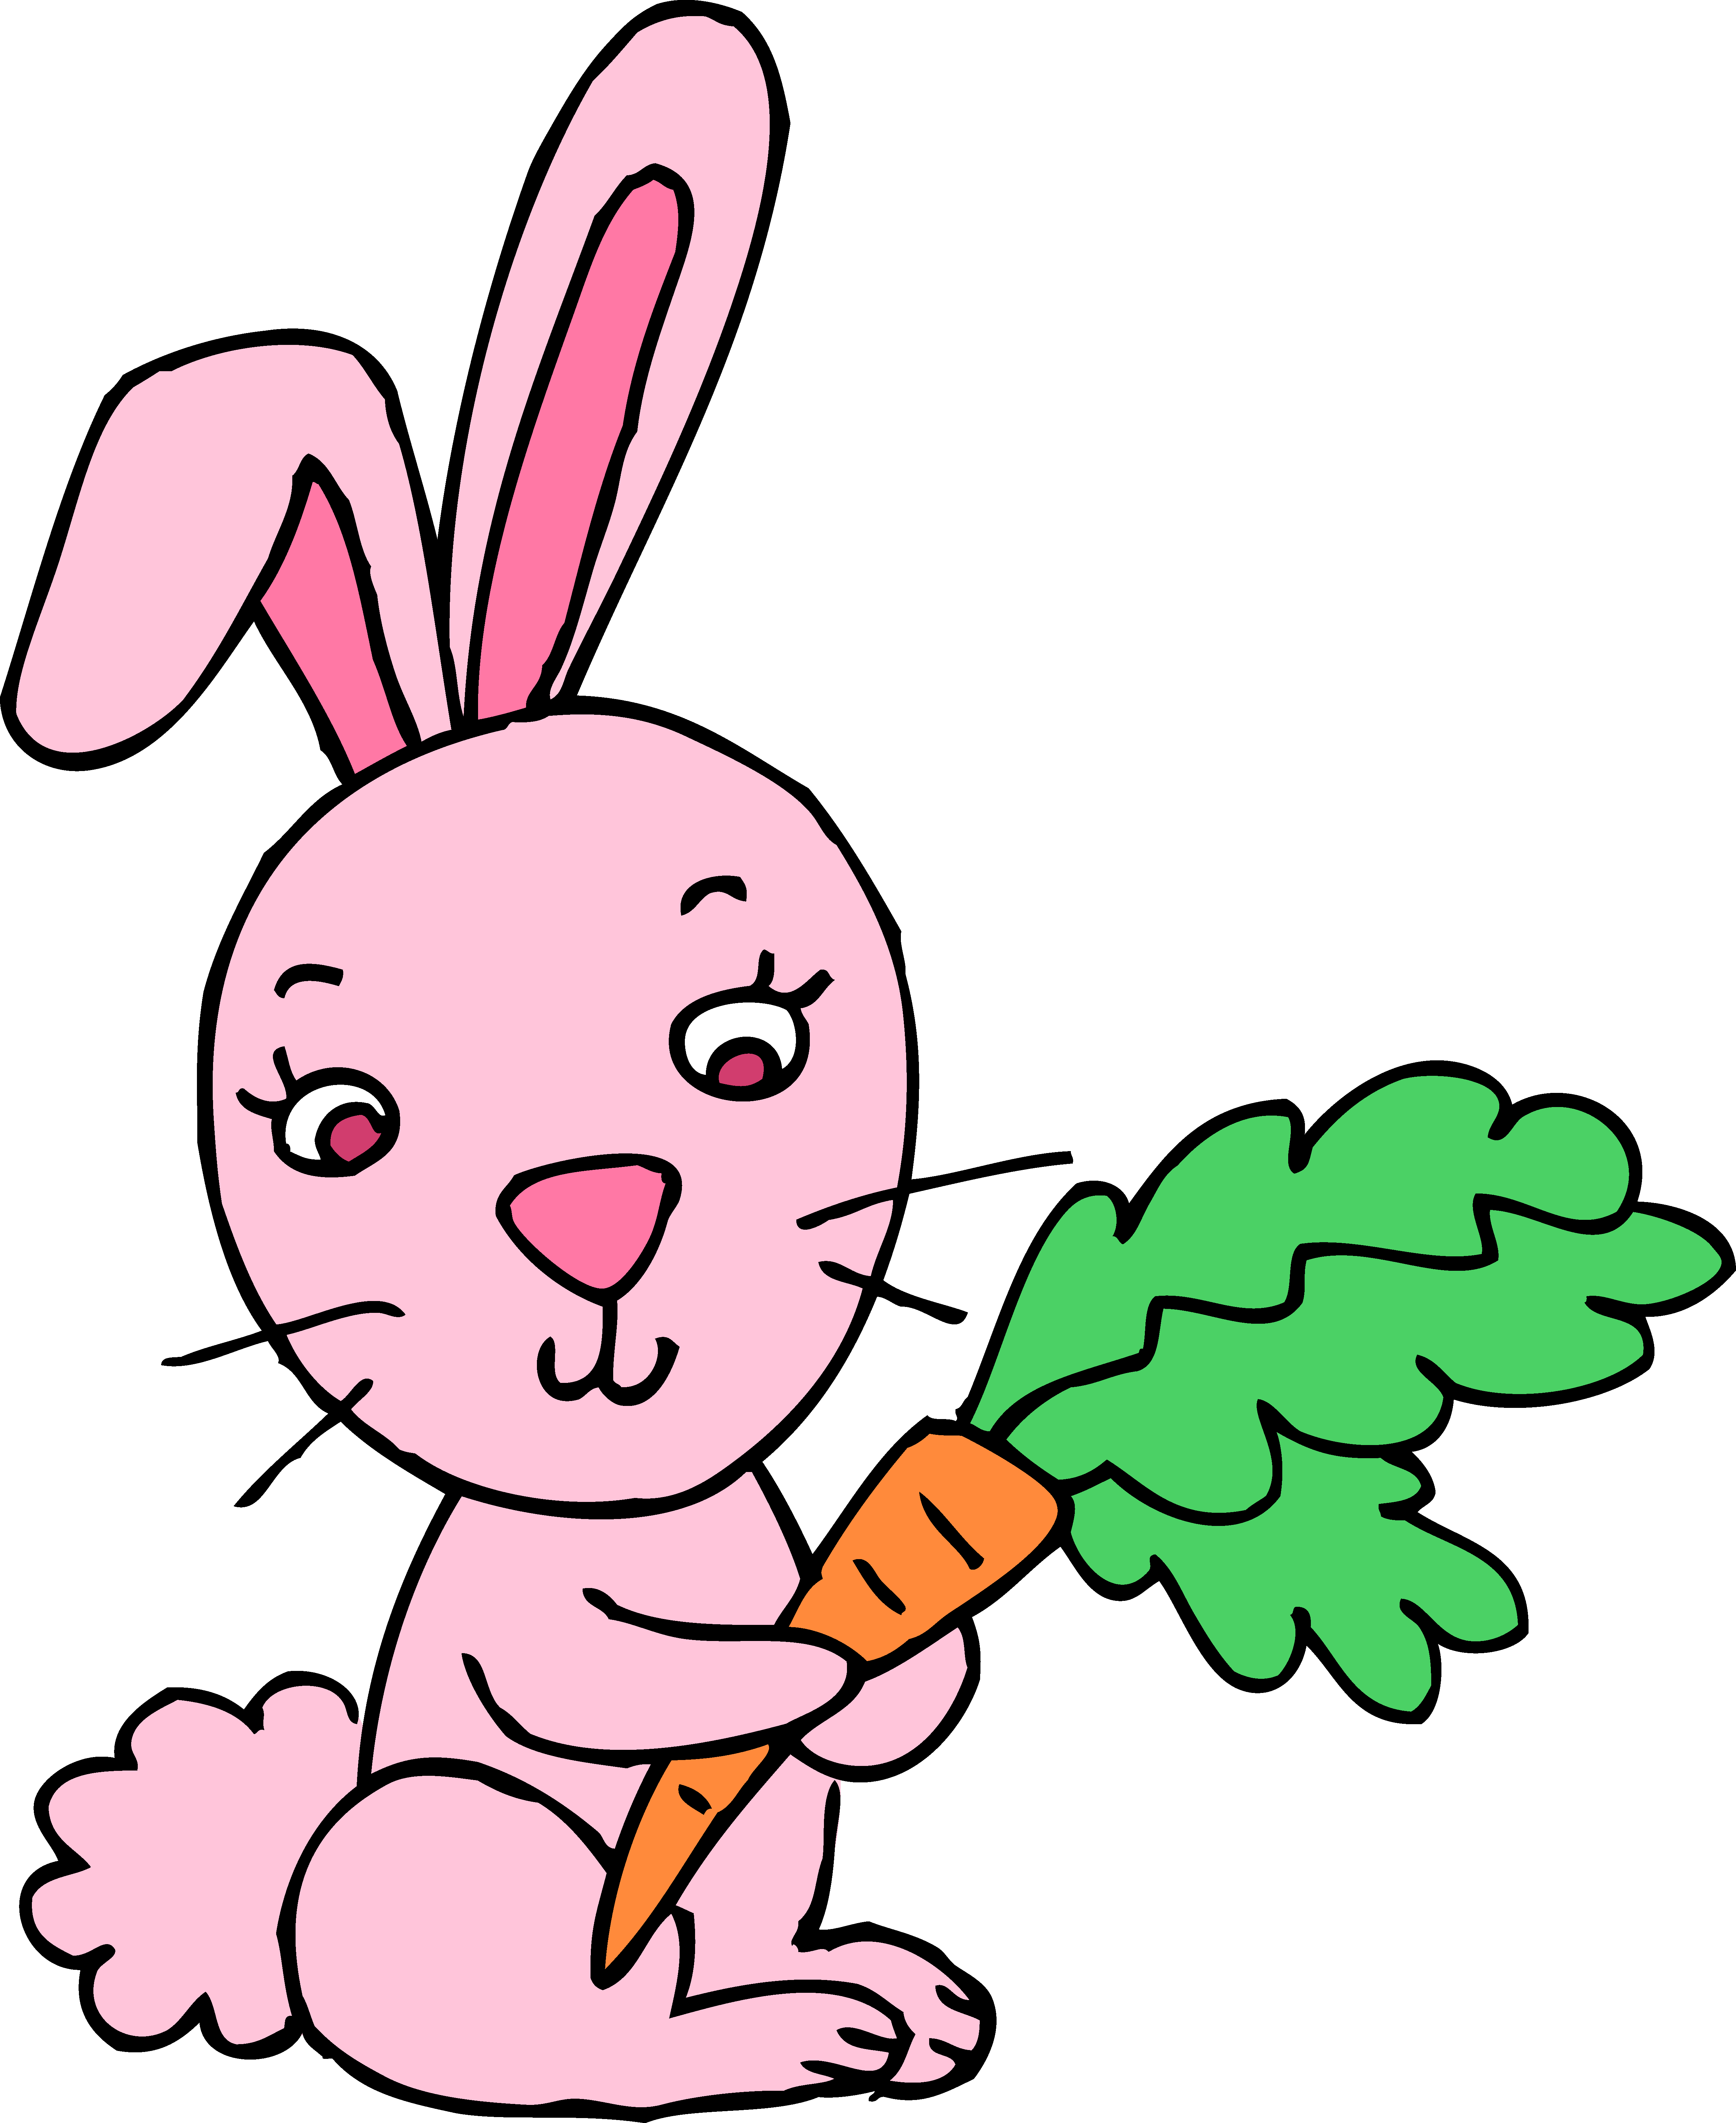 Rabbit clipart #1, Download drawings